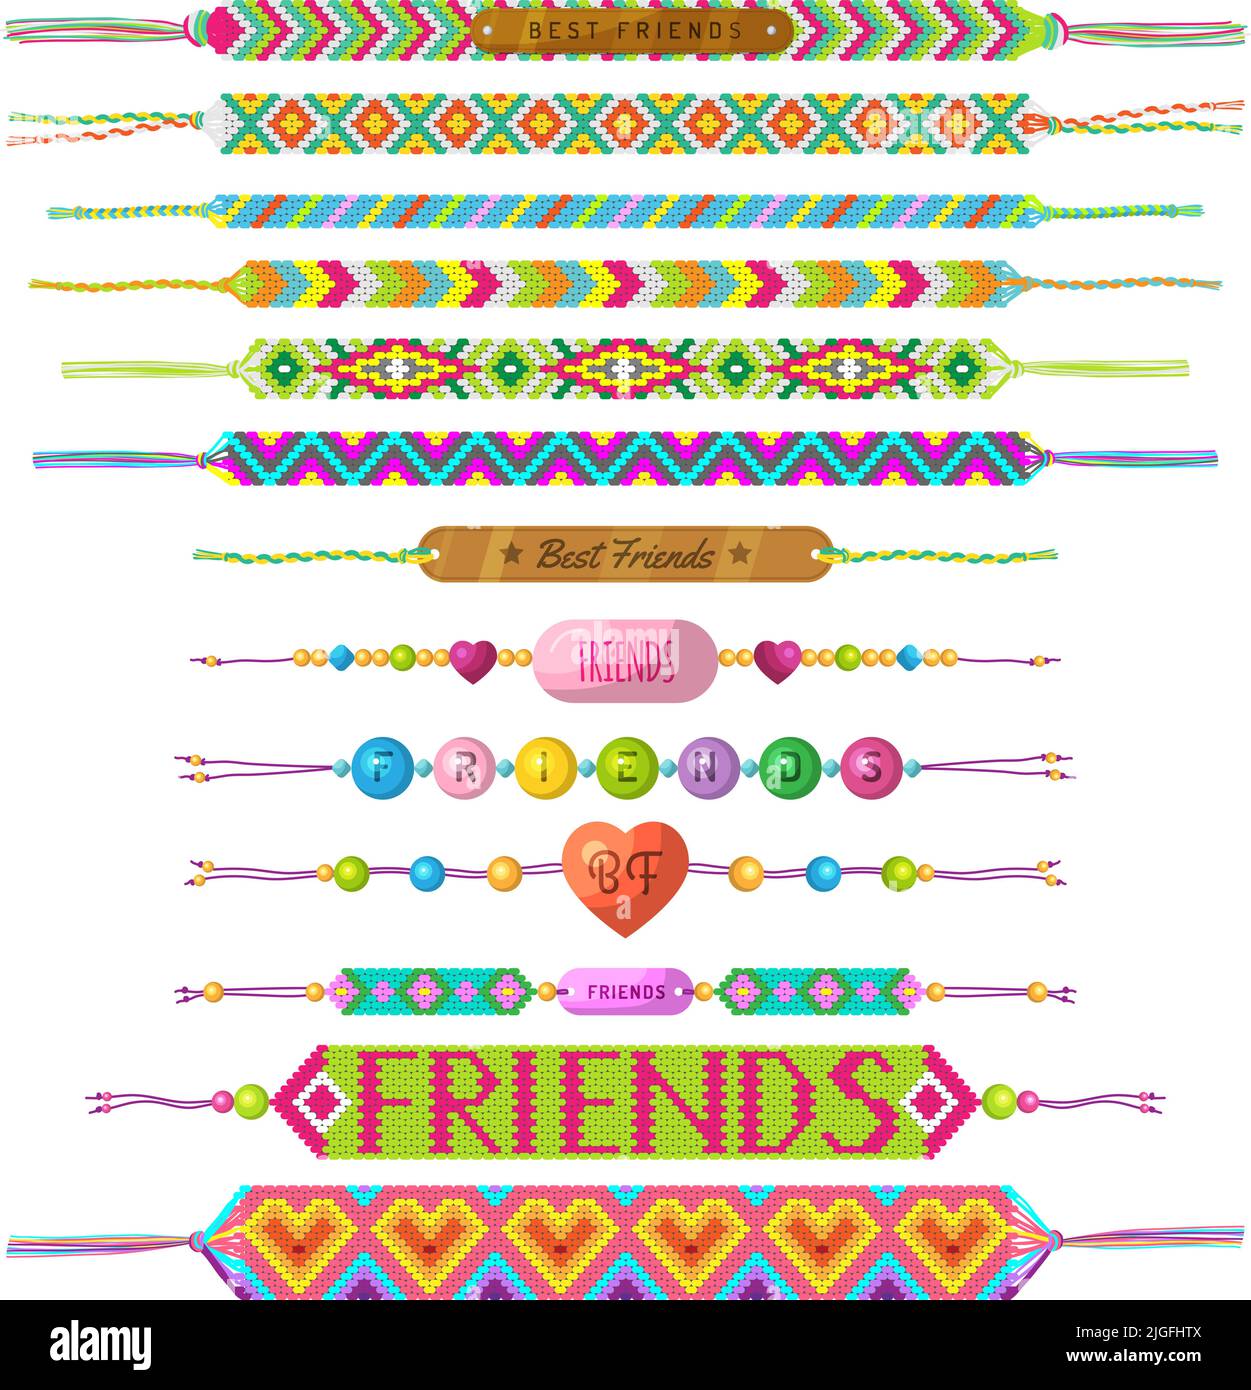 Ethnic bracelet. Handmade colored wristbands friendship connection symbols hippie recent vector jewelry templates Stock Vector